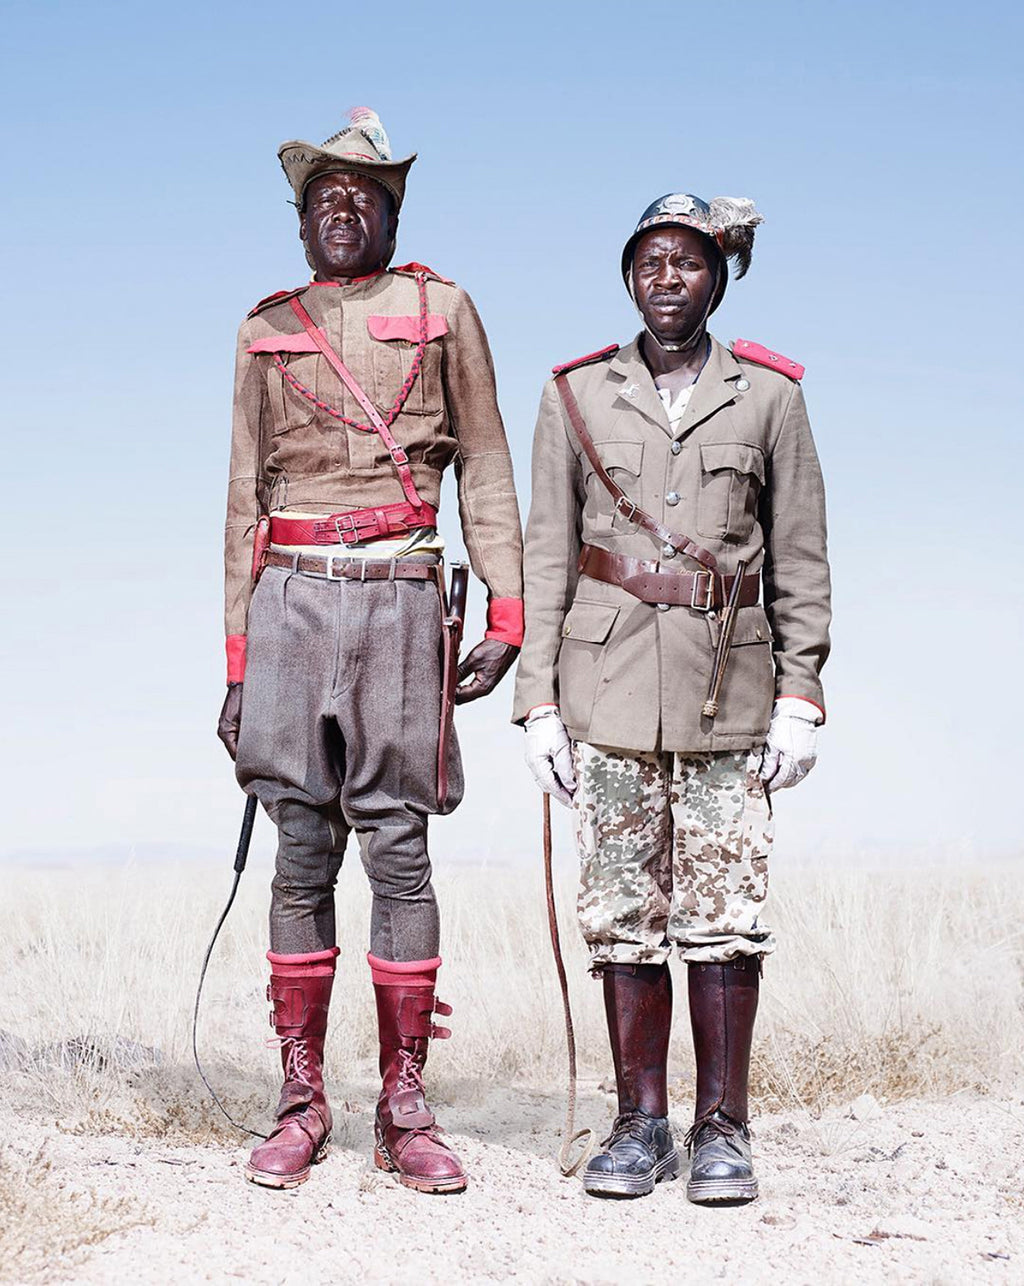 Safari Journal / Blog by Safari Fusion | Victorian style of Namibia | Beautiful imagery of Namibia's Herero people captured by artistic photographer Jim Naughten